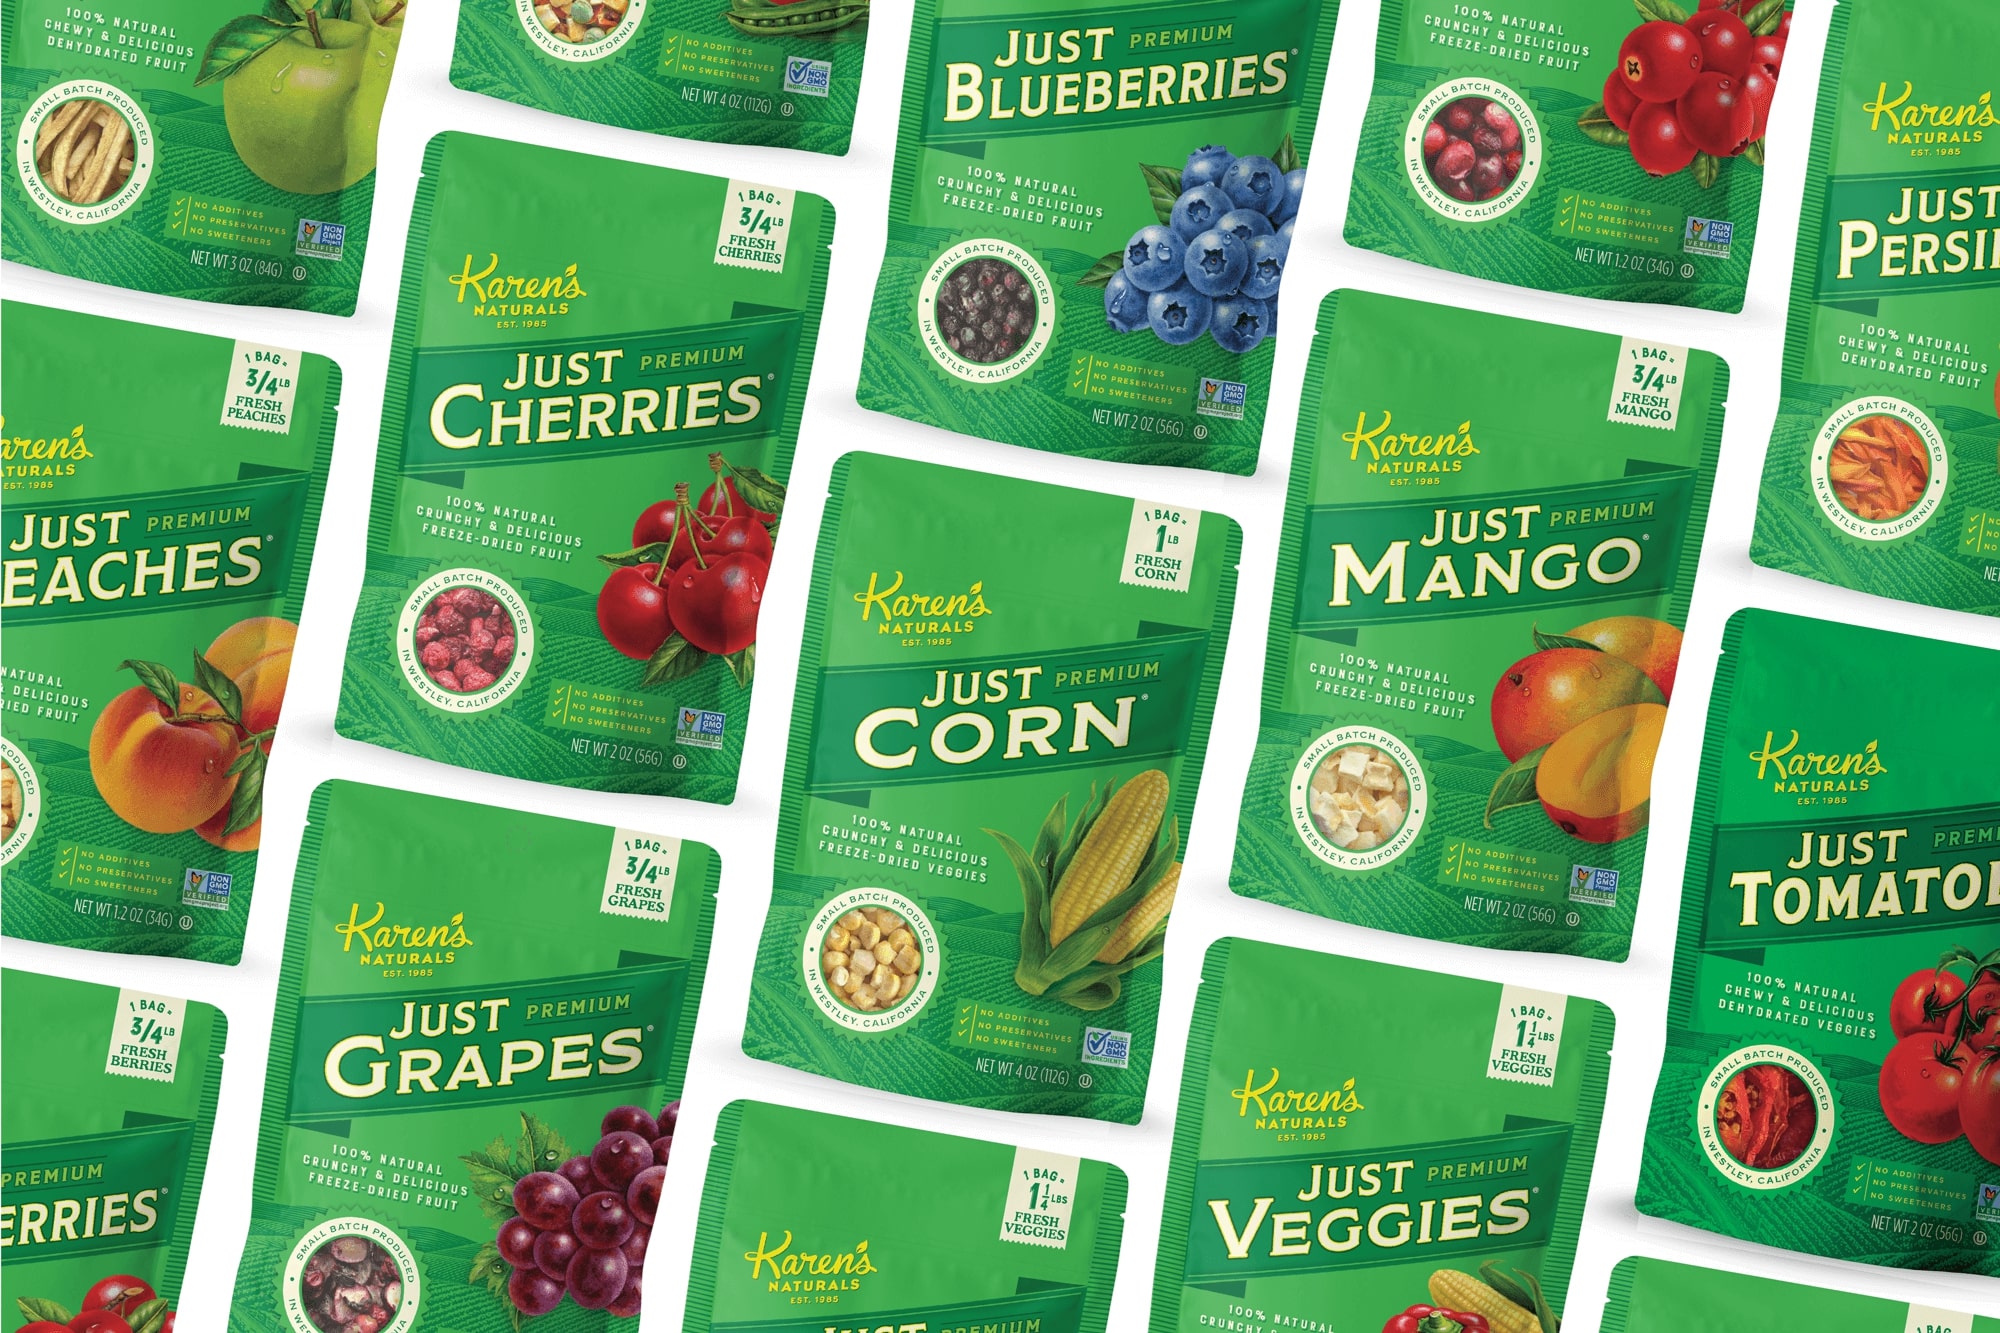 Karen's Naturals new packaging. Lot's of California produce: cherry, blueberry, peaches, grapes, corn, mango, tomatoes, and apple.  